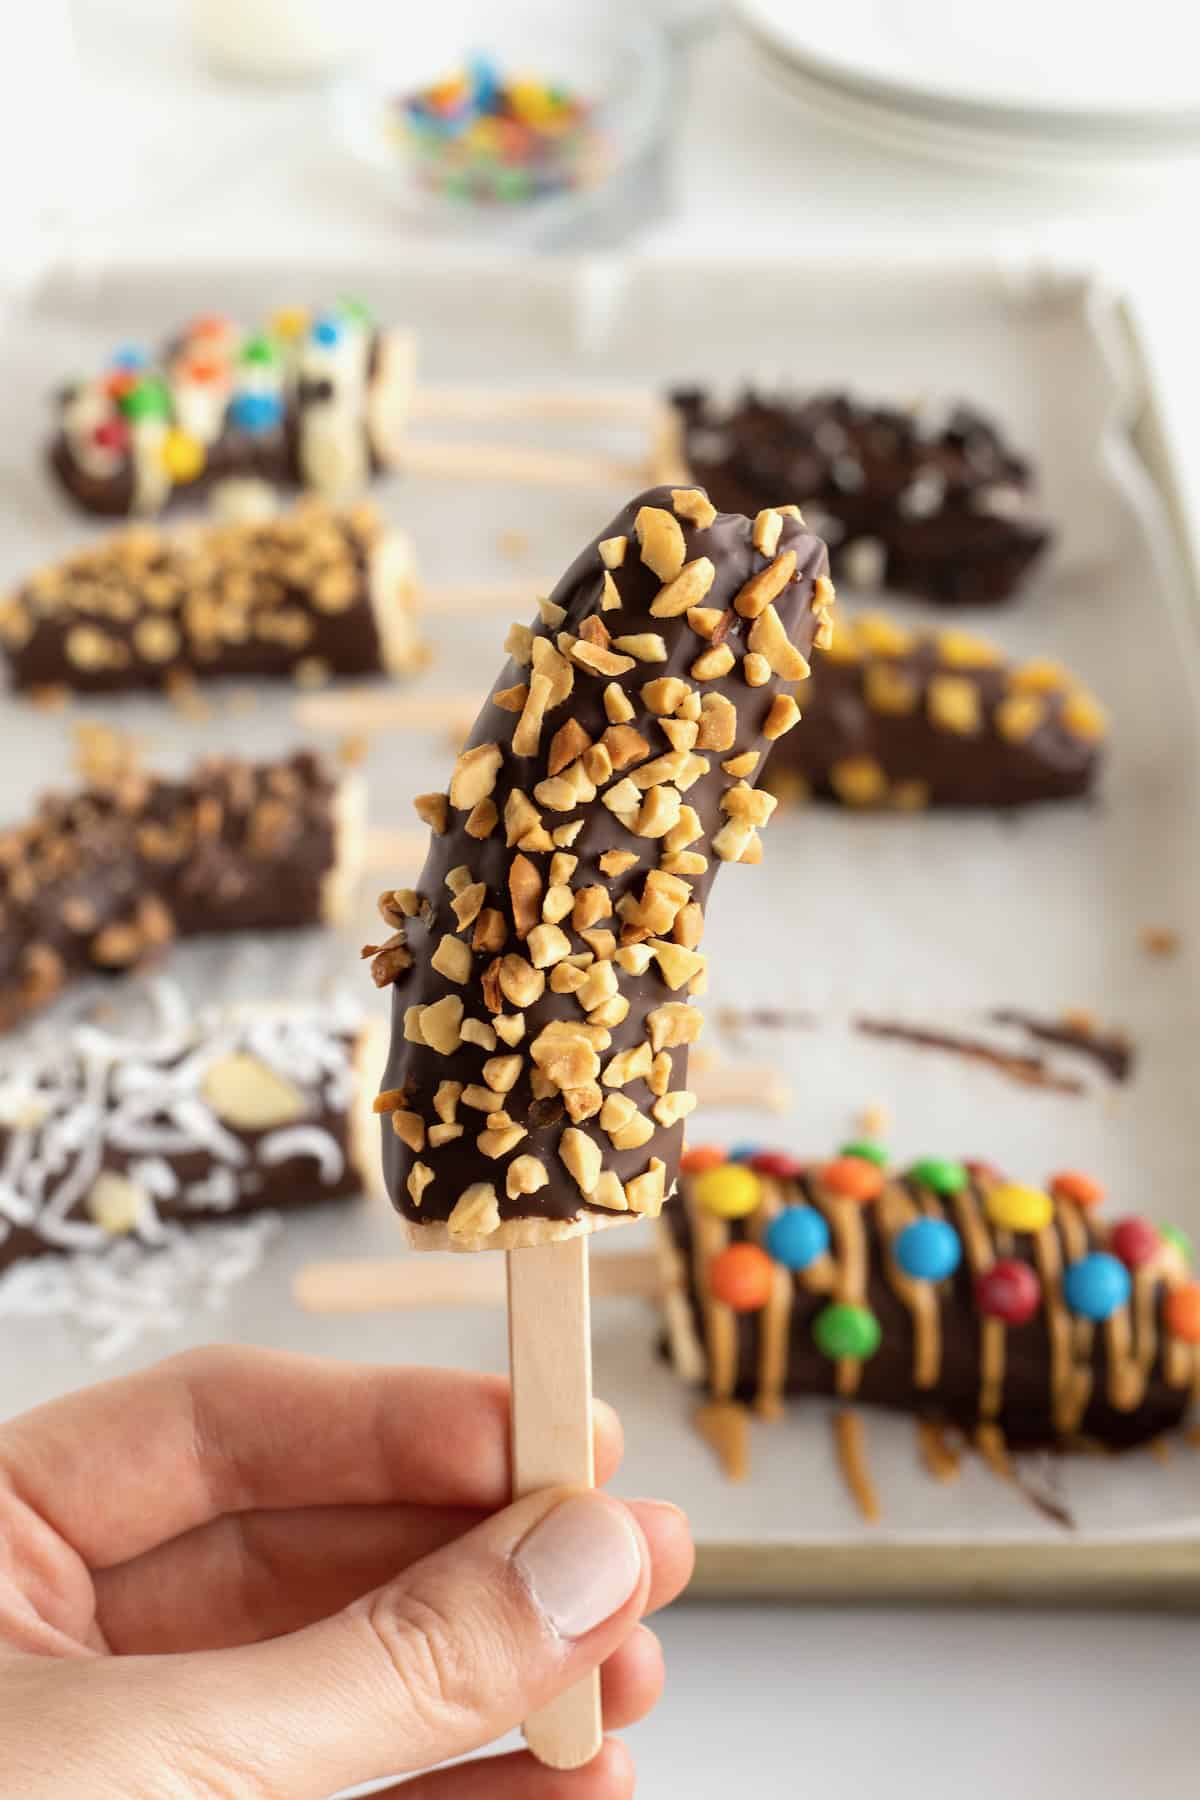 A frozen banana on a popsicle stick covered in chocolate and crushed peanuts.